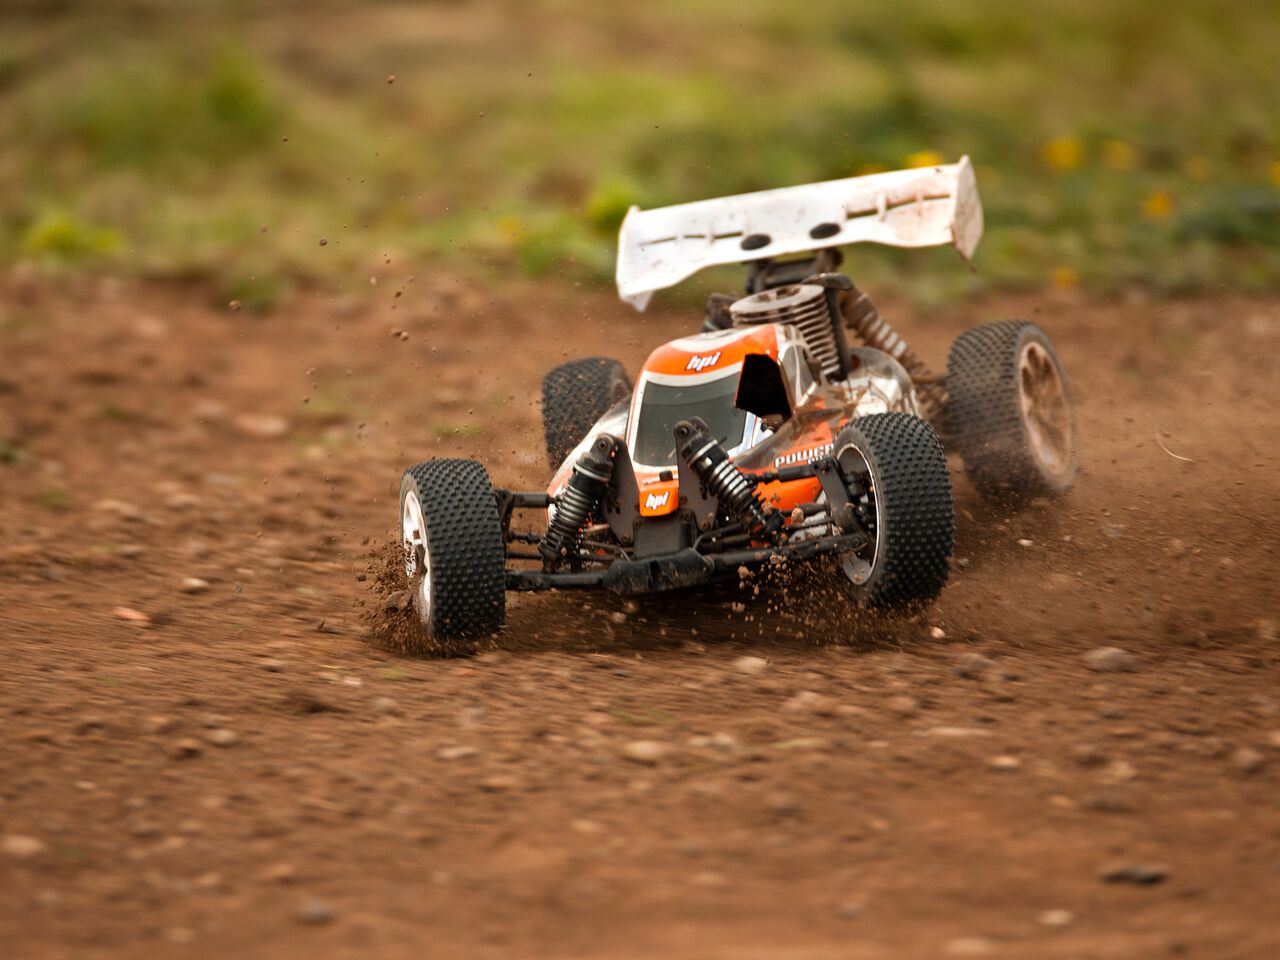  1/8  - Pulse 4.6 Buggy RTR 2.4GHz